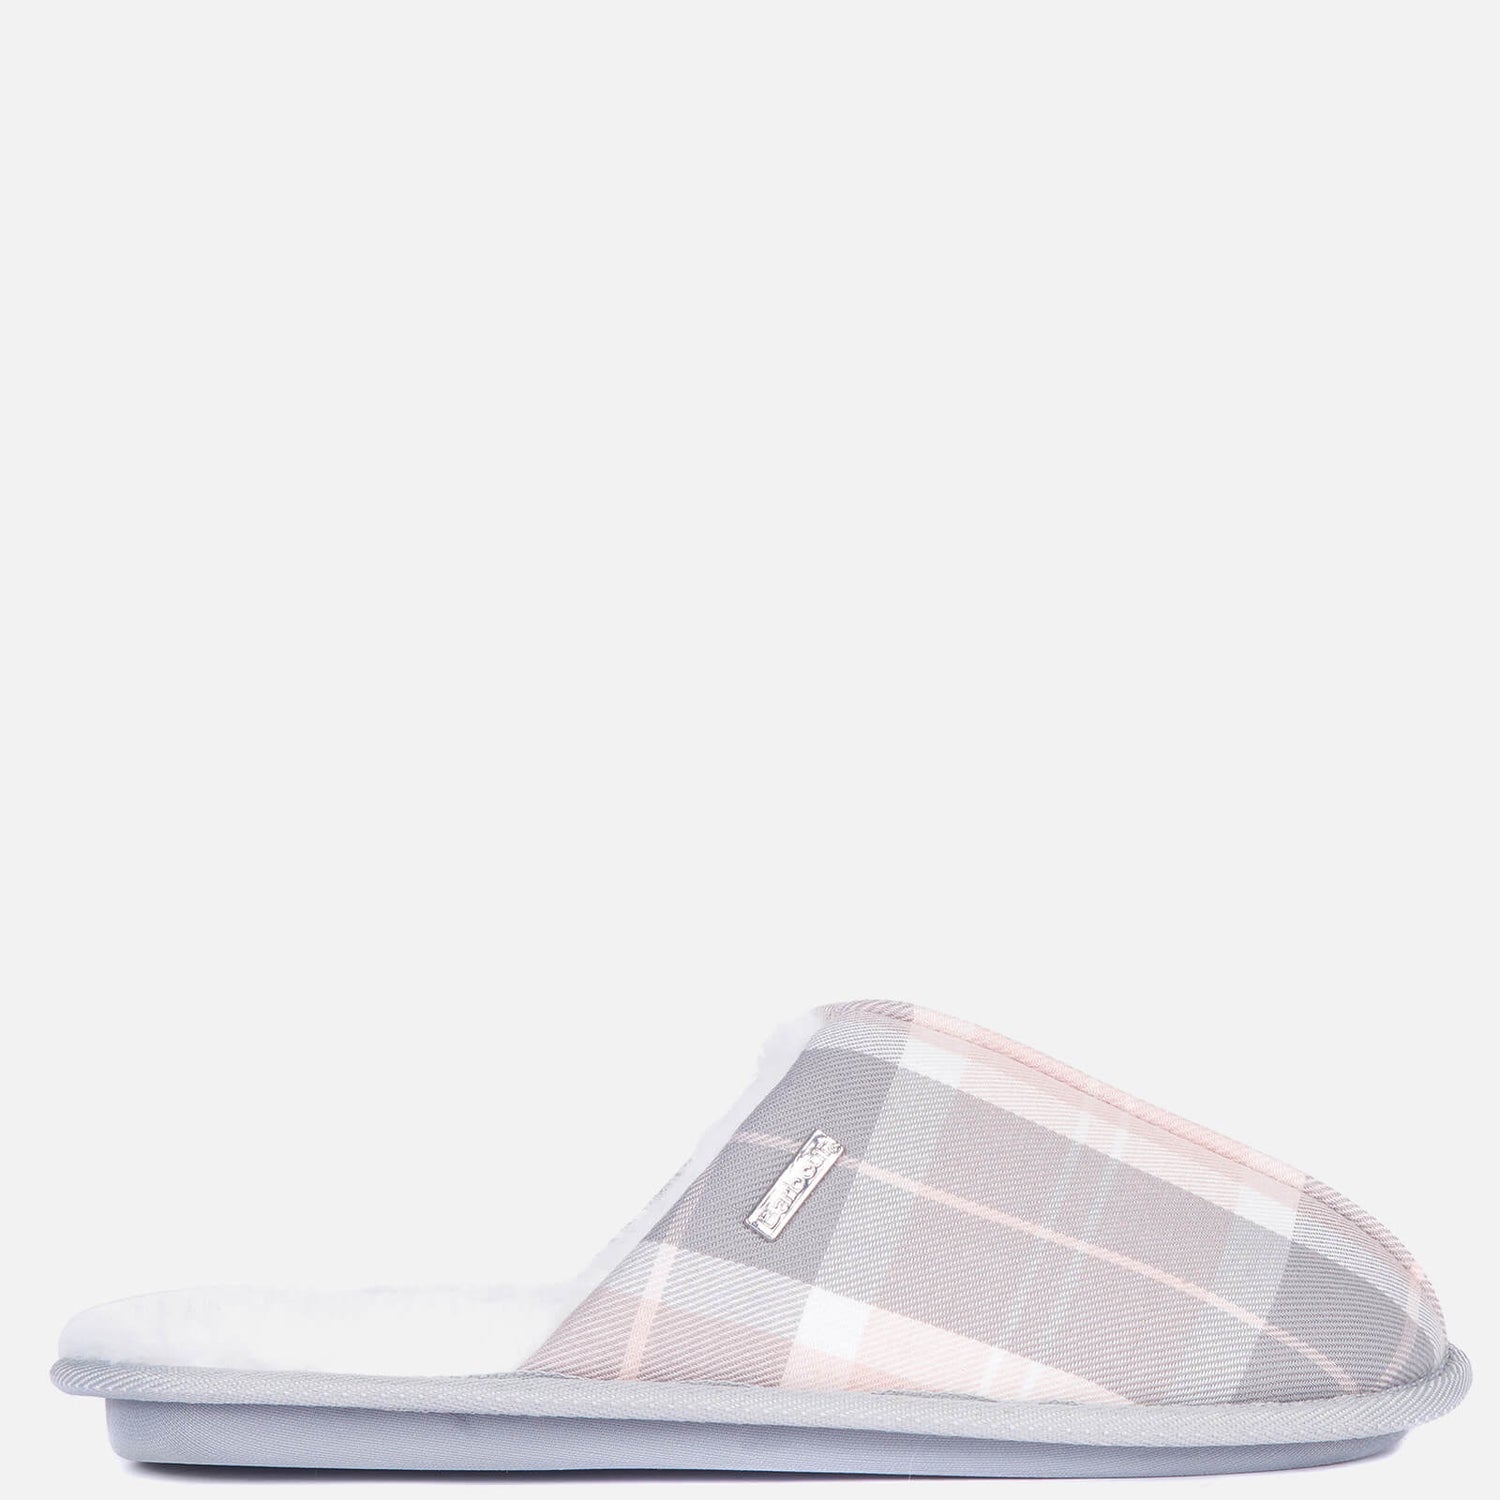 Barbour Women's Maddie Slippers - Recycled Pink/Grey Tartan